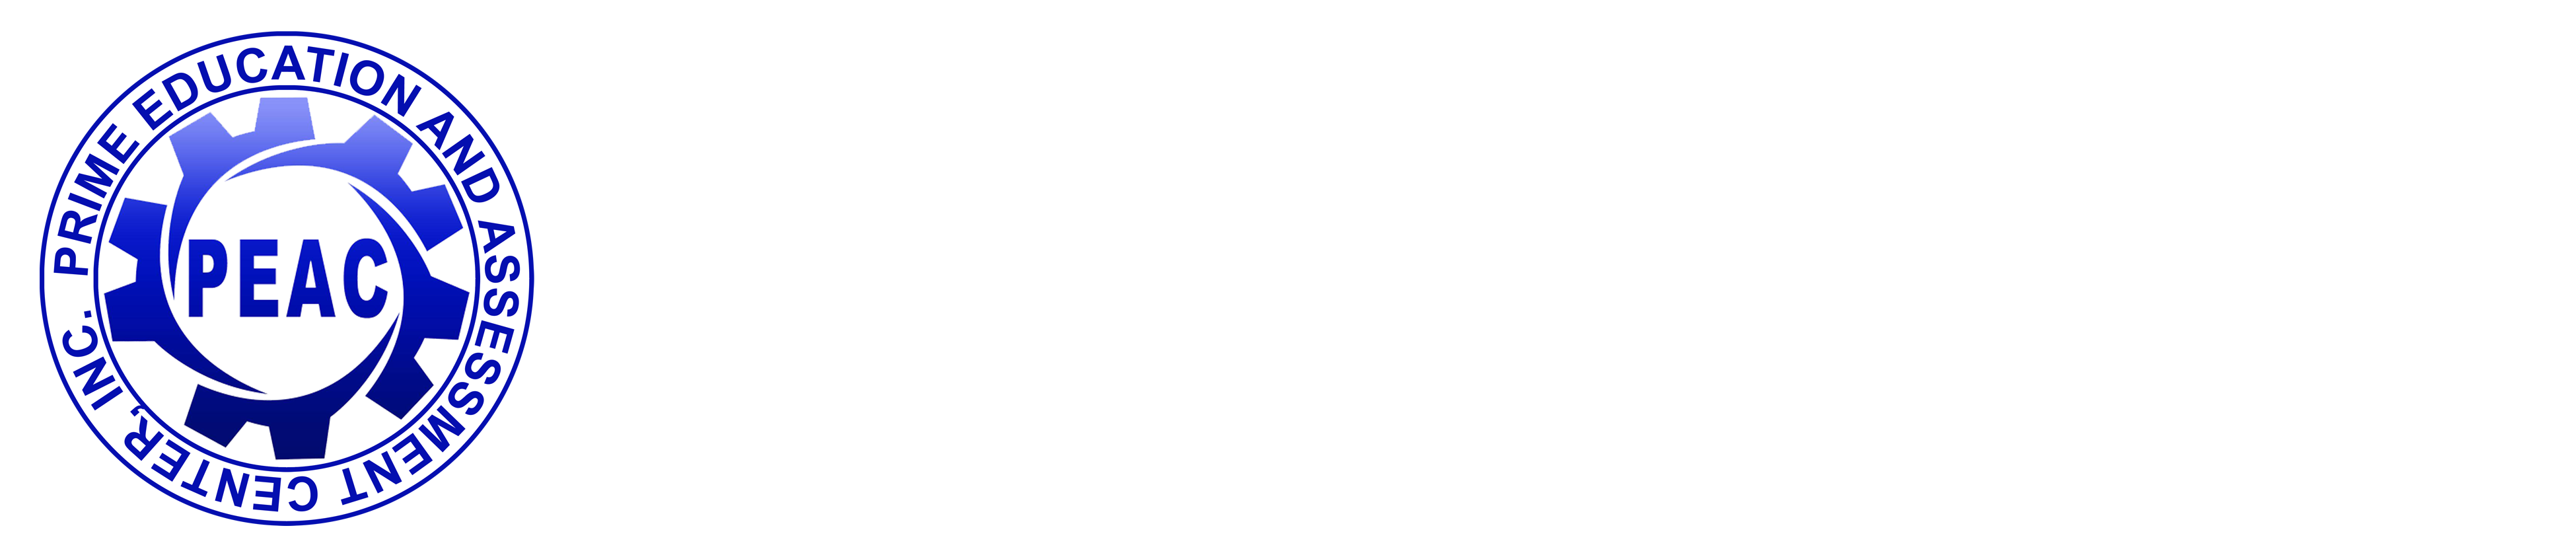 Prime Education and Assessment Center Inc.